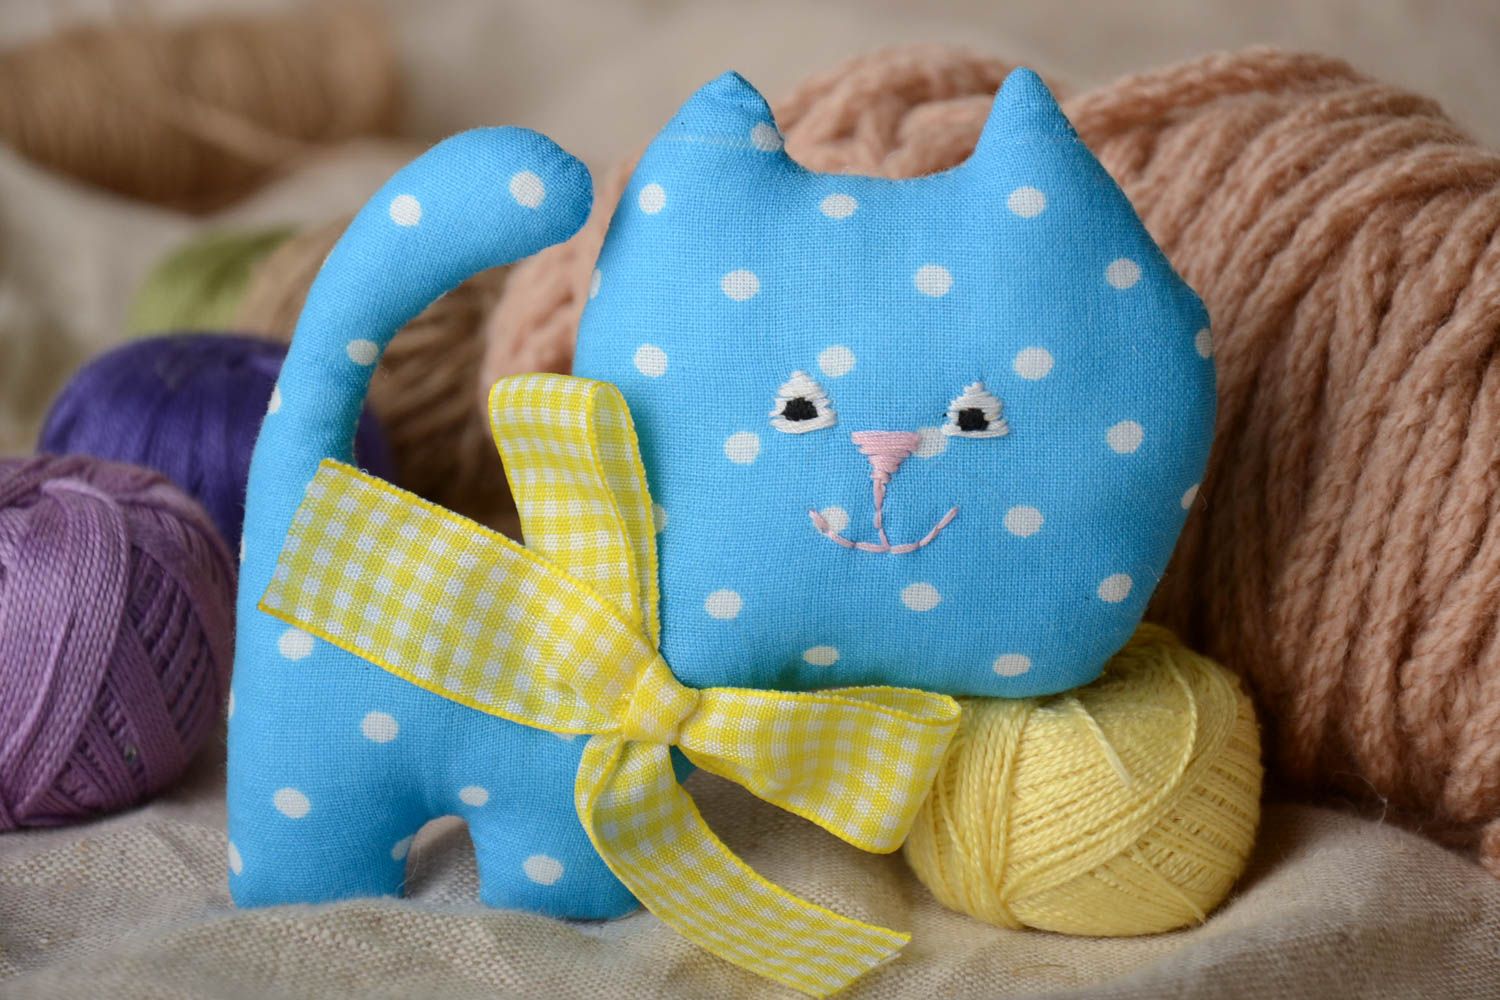 Handmade toy is sewn in the form of a blue cat present for little children photo 1